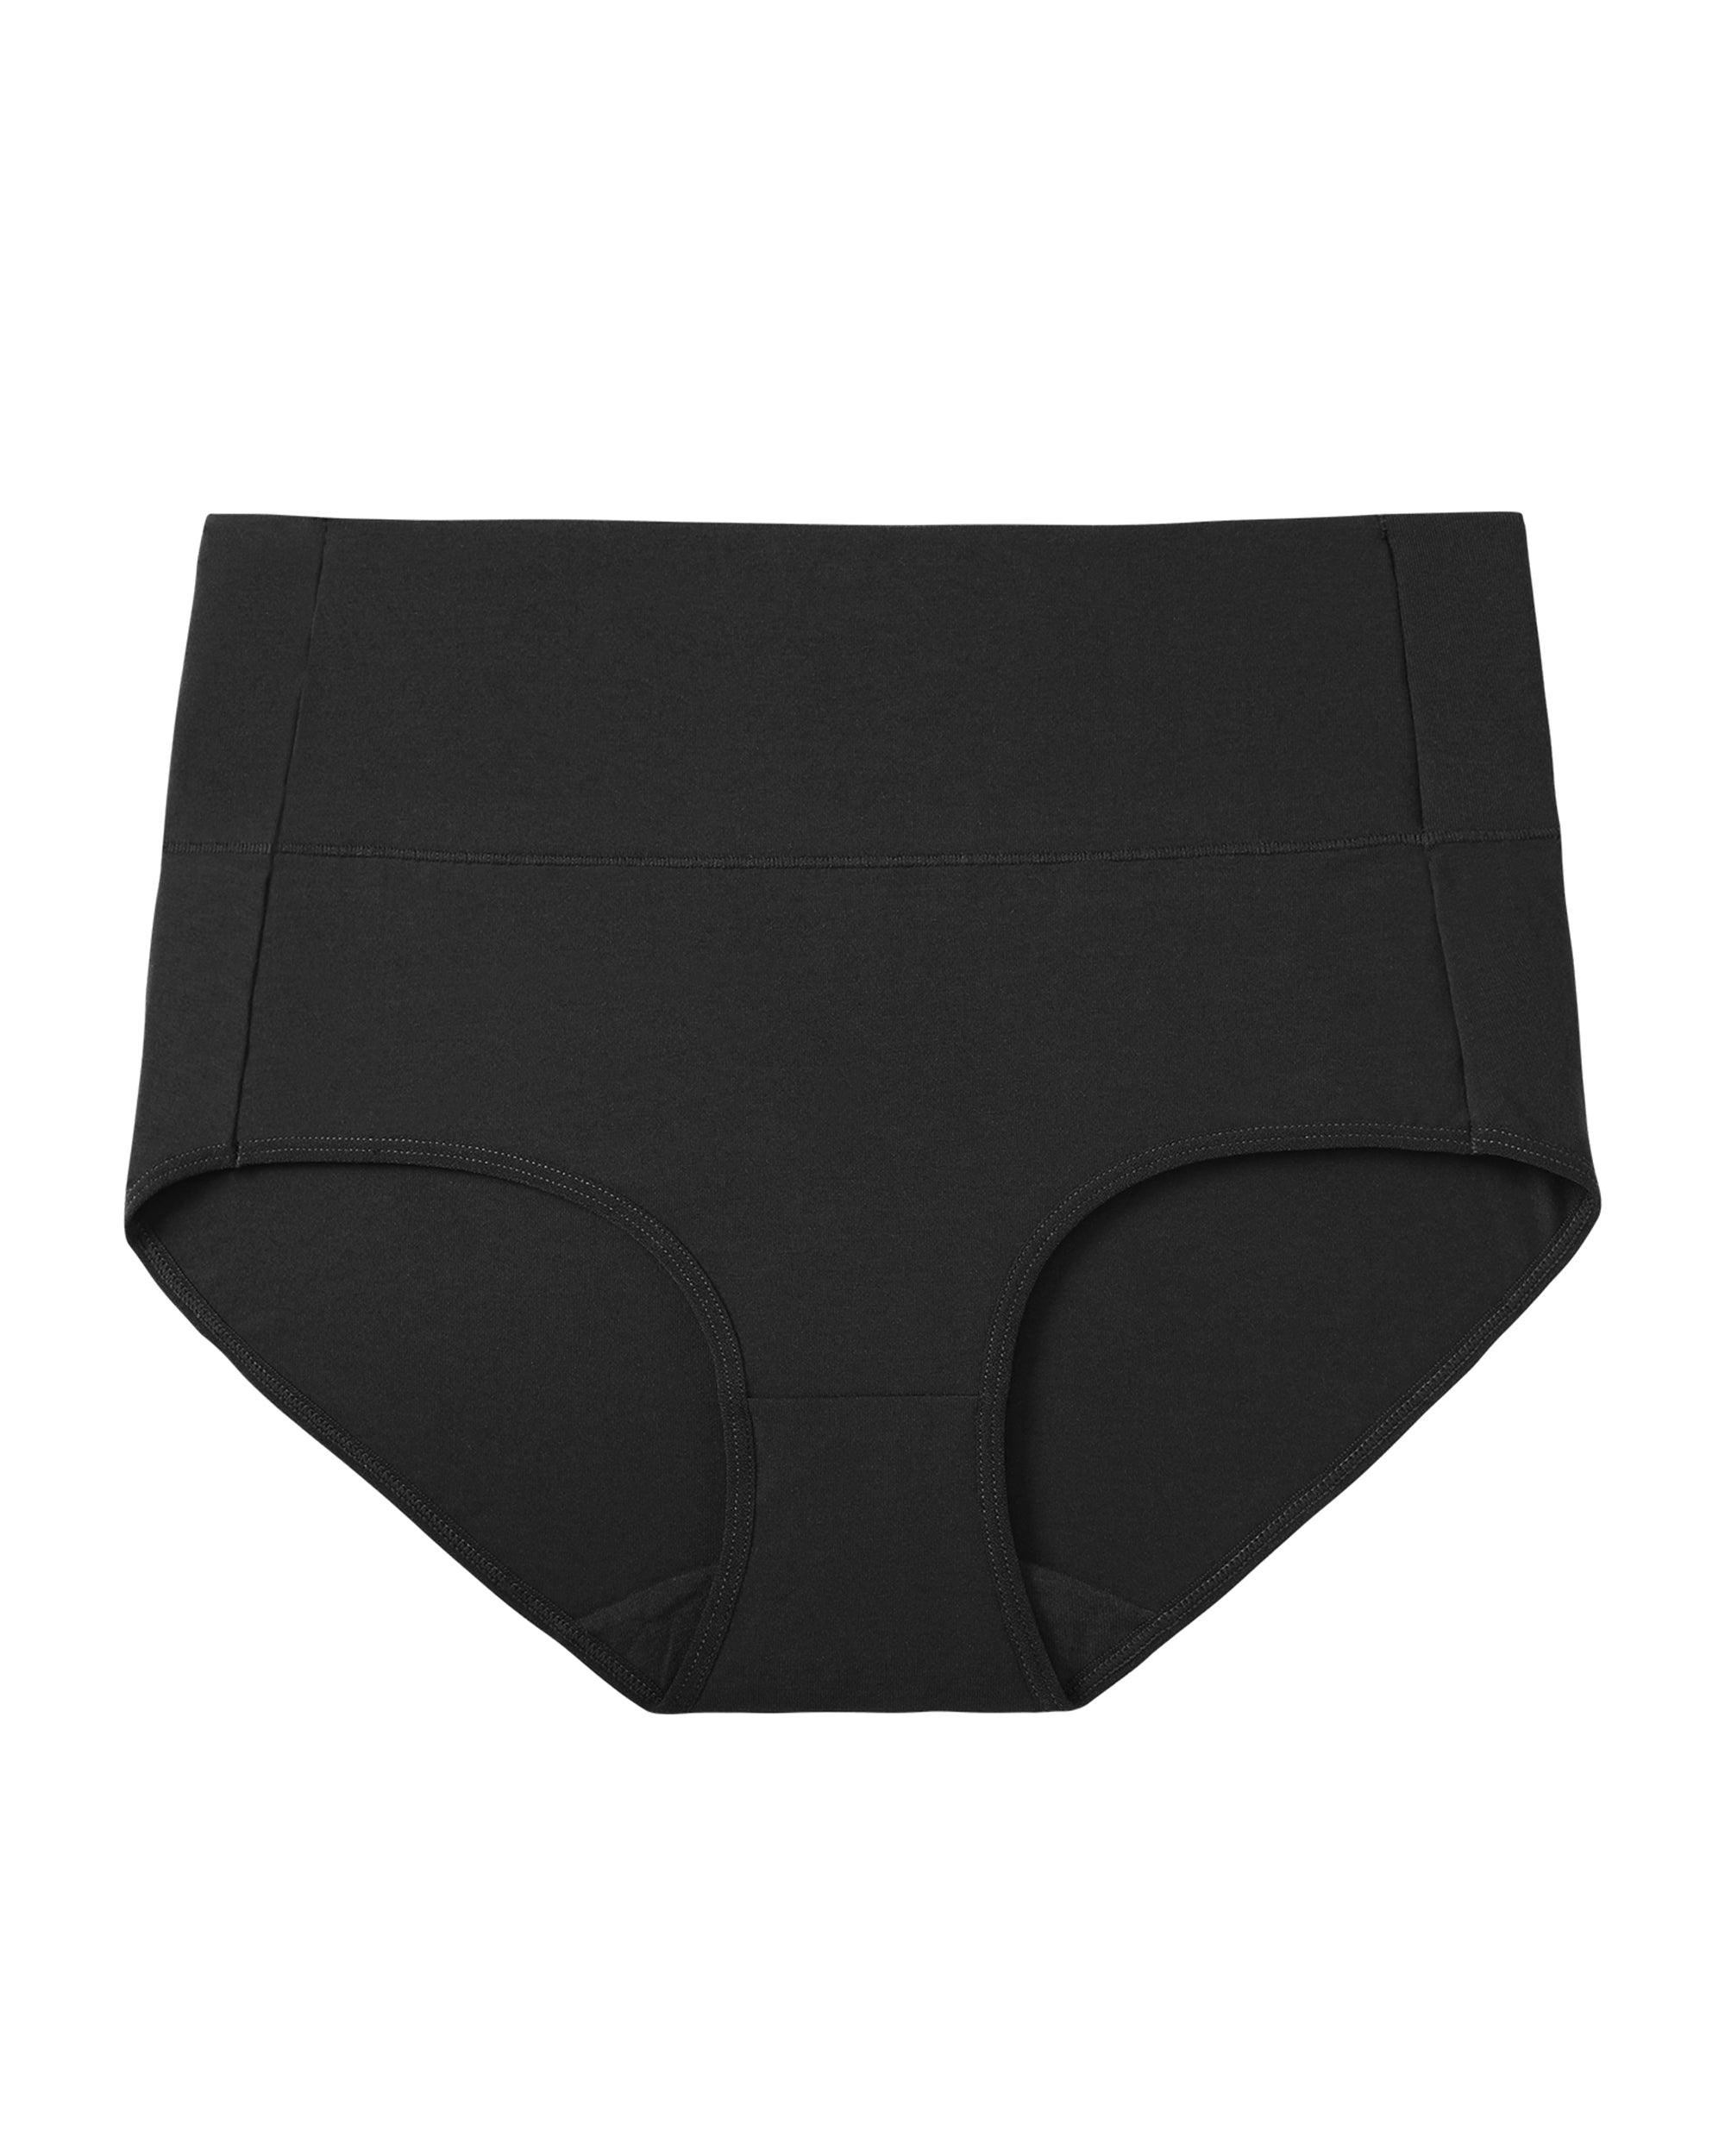 SheSsexy Tummy Control Underwear Women Cotton High Waisted Postpartum C  Section Panties Ladies Stretch Comfortable Briefs Black at  Women's  Clothing store